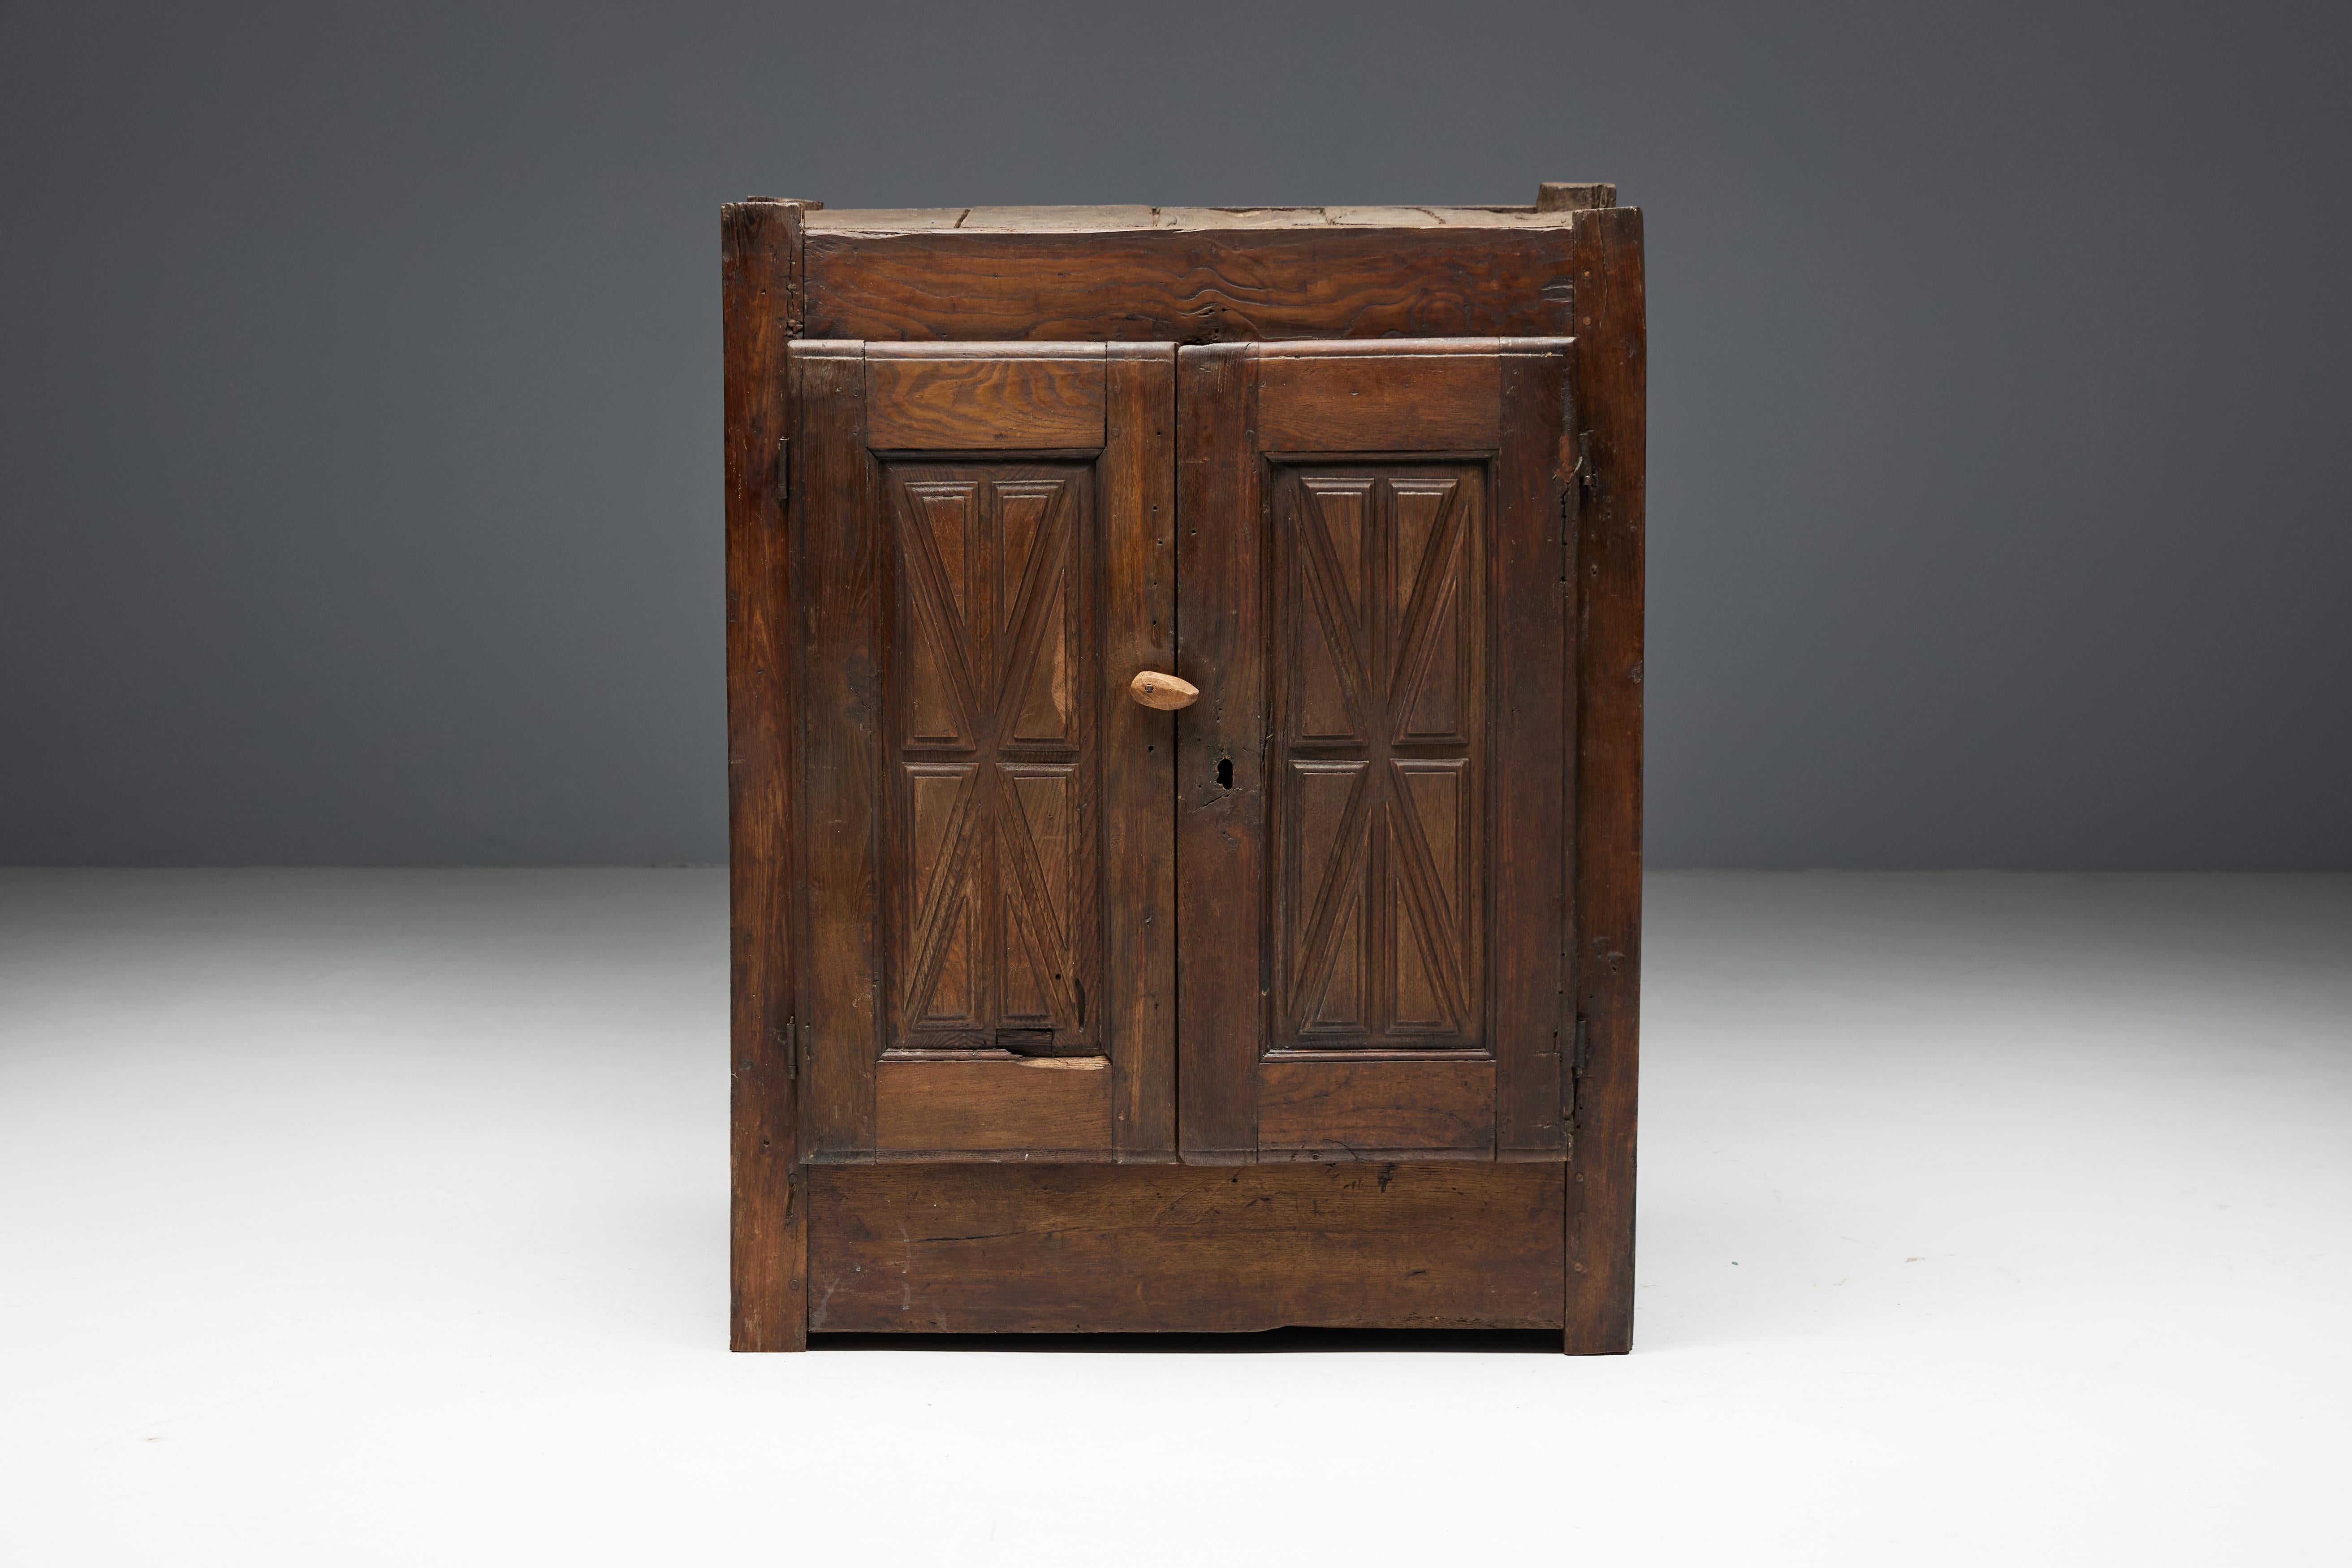 Art populaire chestnut cupboard from the Ardèche region, dating back to the 19th century. This exquisite piece hails from the rustic traditions of the South of France and is crafted from solid chestnut wood. Exuding historical charm with its